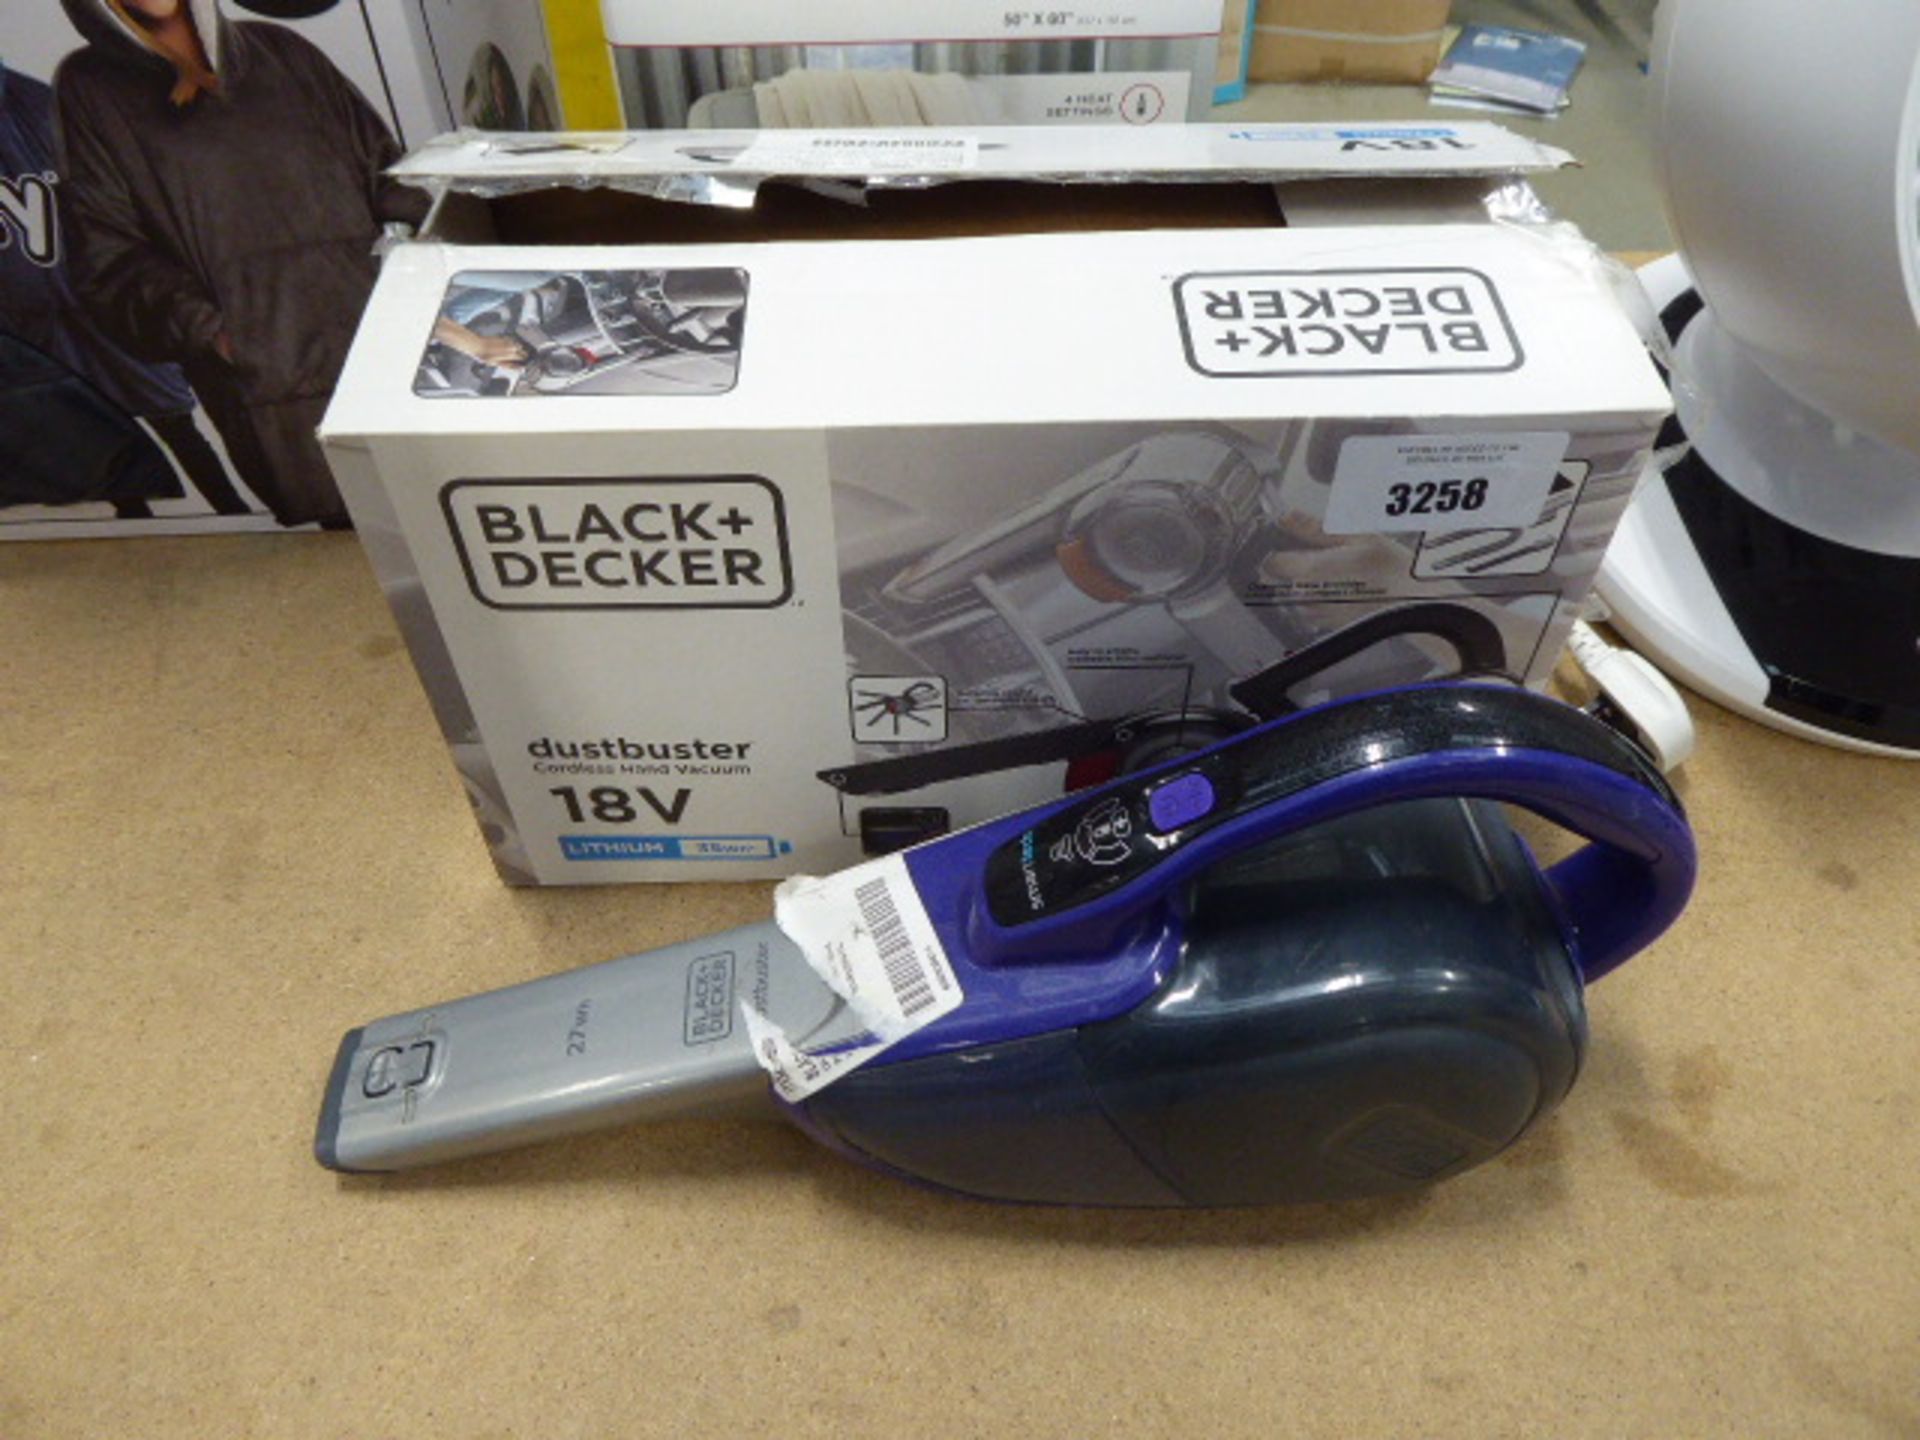 Boxed Black & Decker Dustbuster plus another unboxed (unboxed unit missing charger)